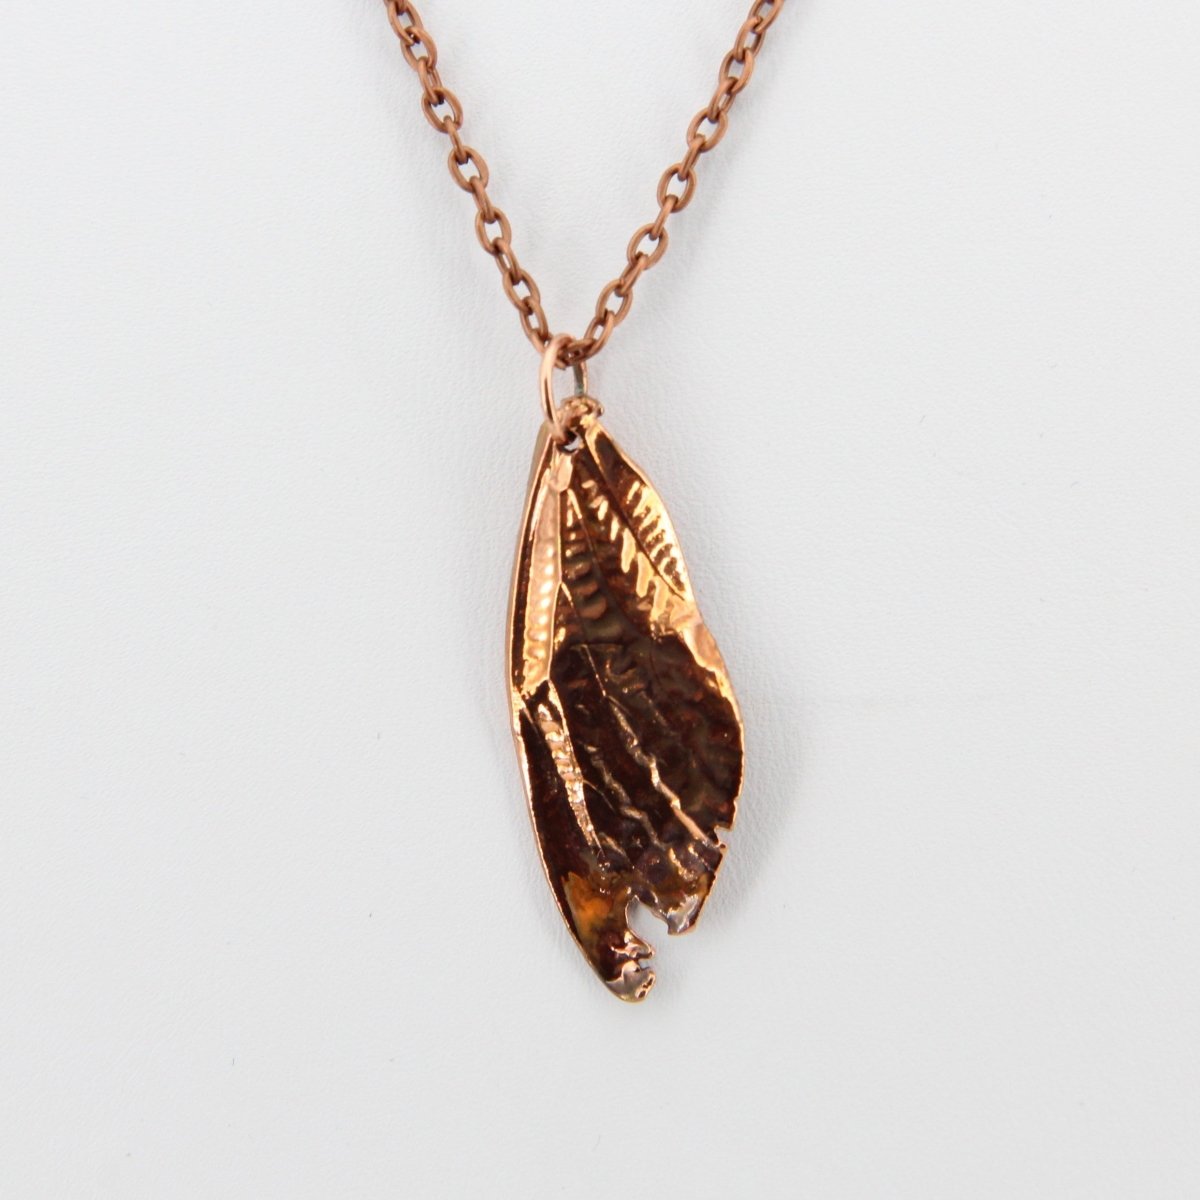 Real Cicada Wing Jewelry, Brood X, Copper Electroformed Pendant, Gift for Nature Lover, Fairy Wing Pendant